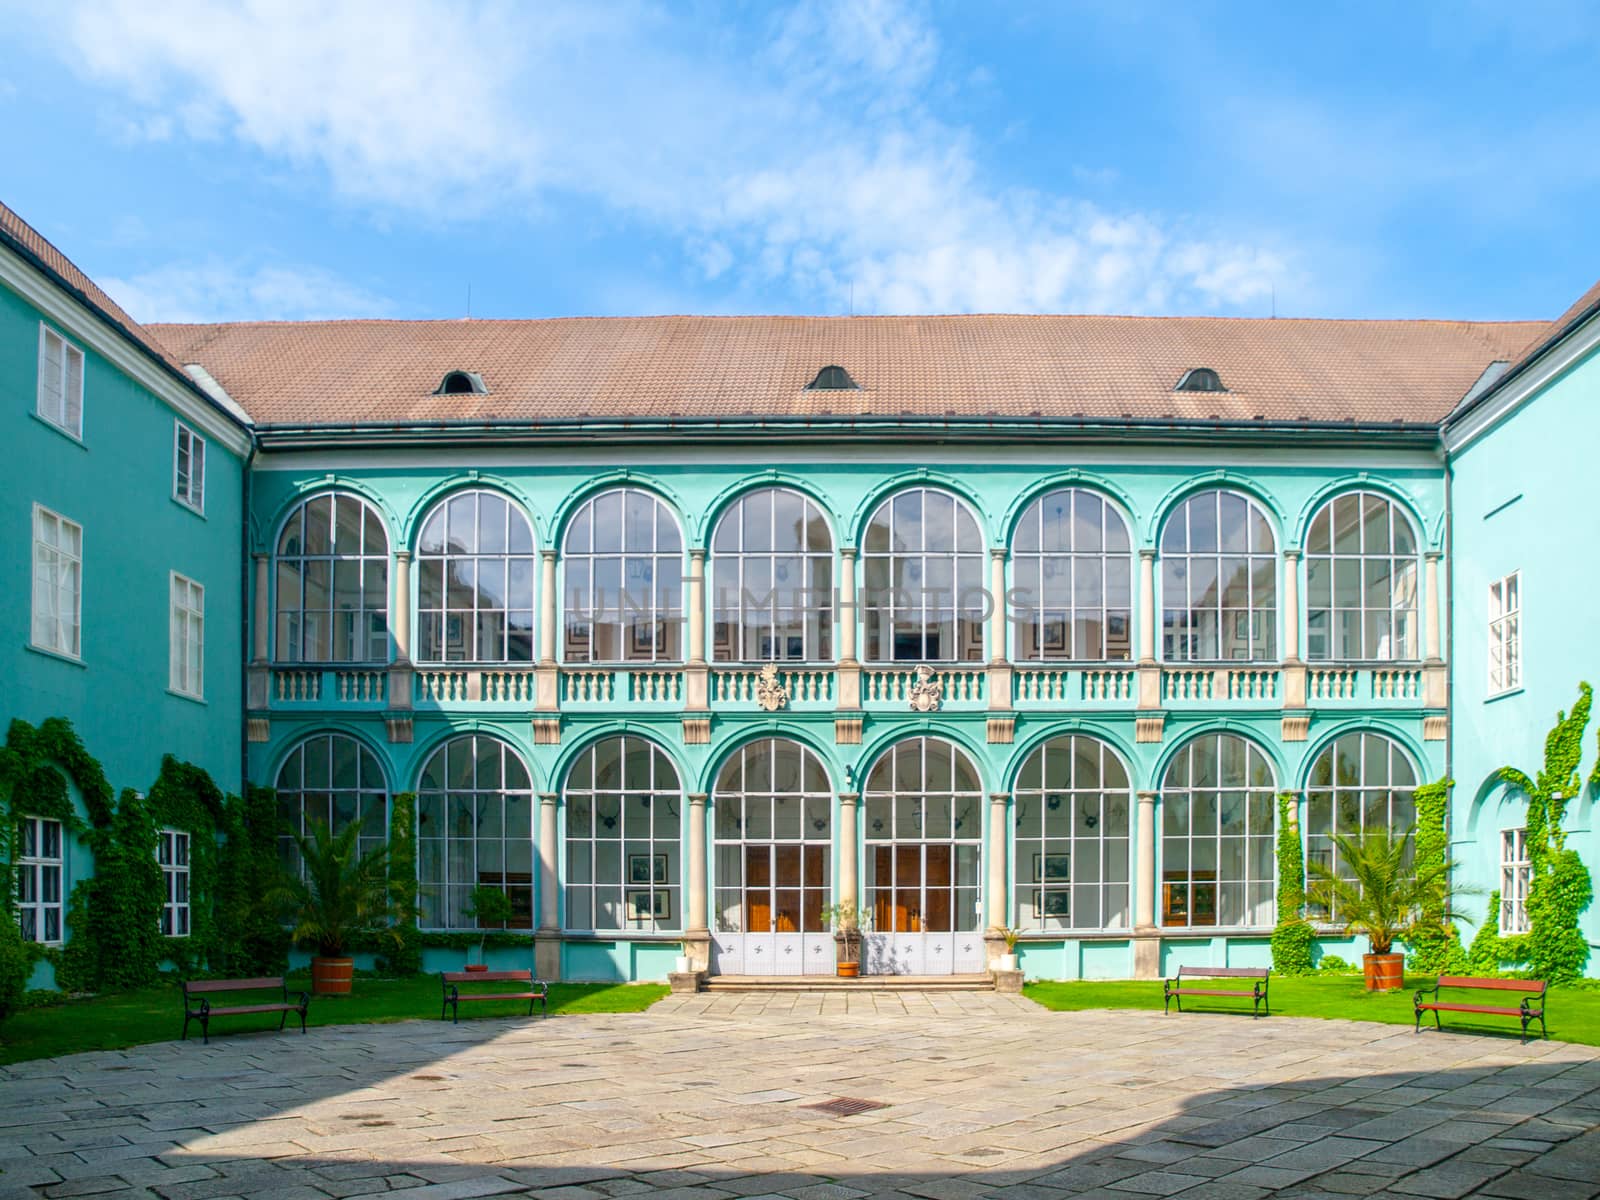 Courtyard with glazed windows of renaissance chateau in Dacice, Czech Republic.